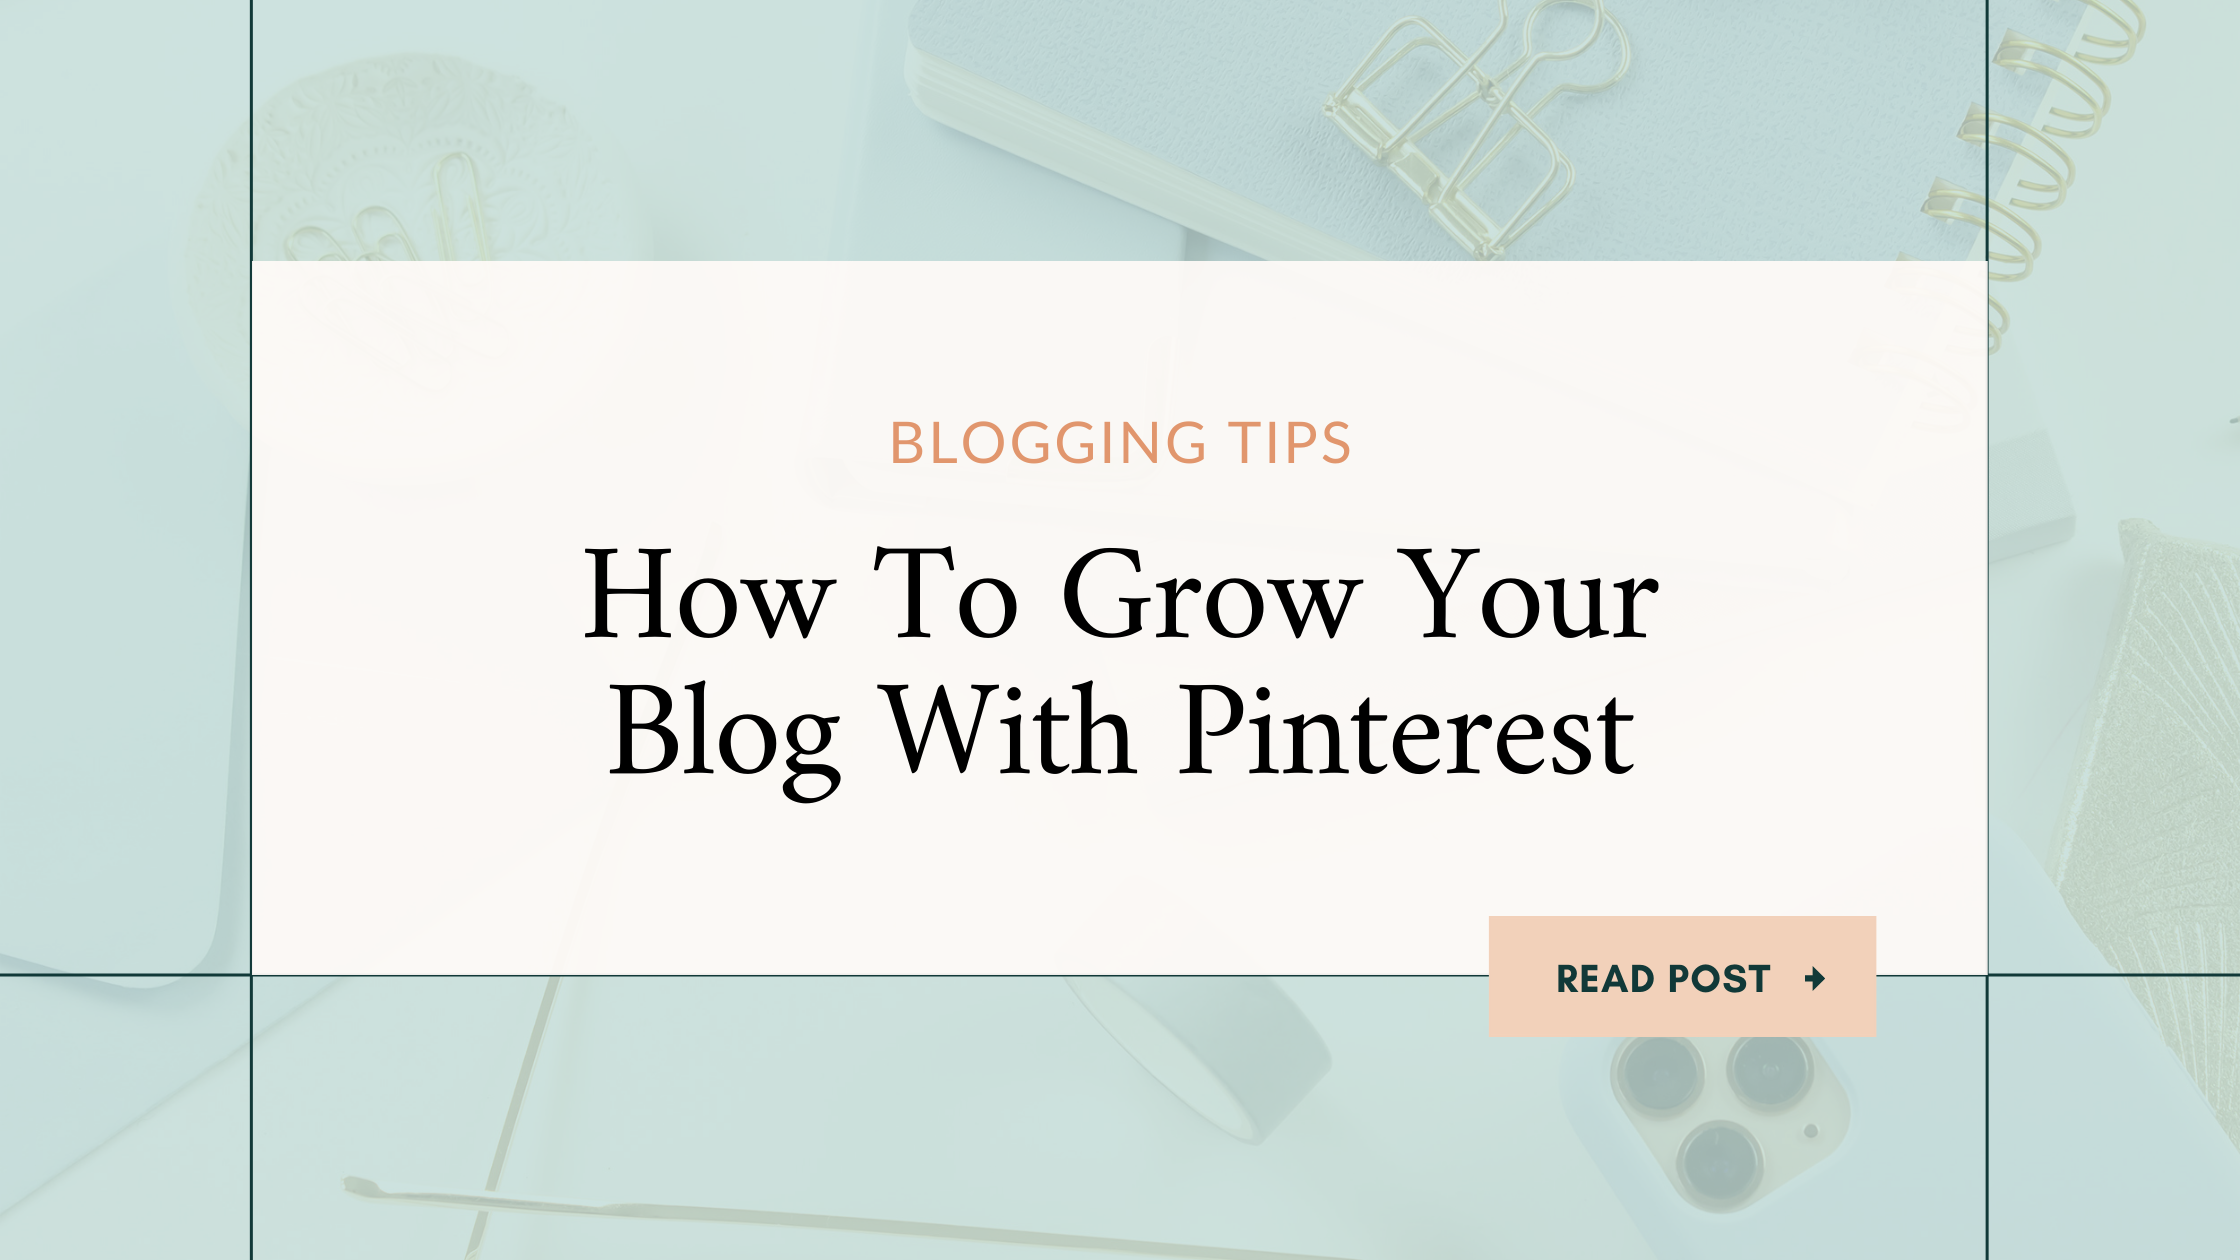 How To Grow Your Blog With Pinterest In 7 Easy Ways